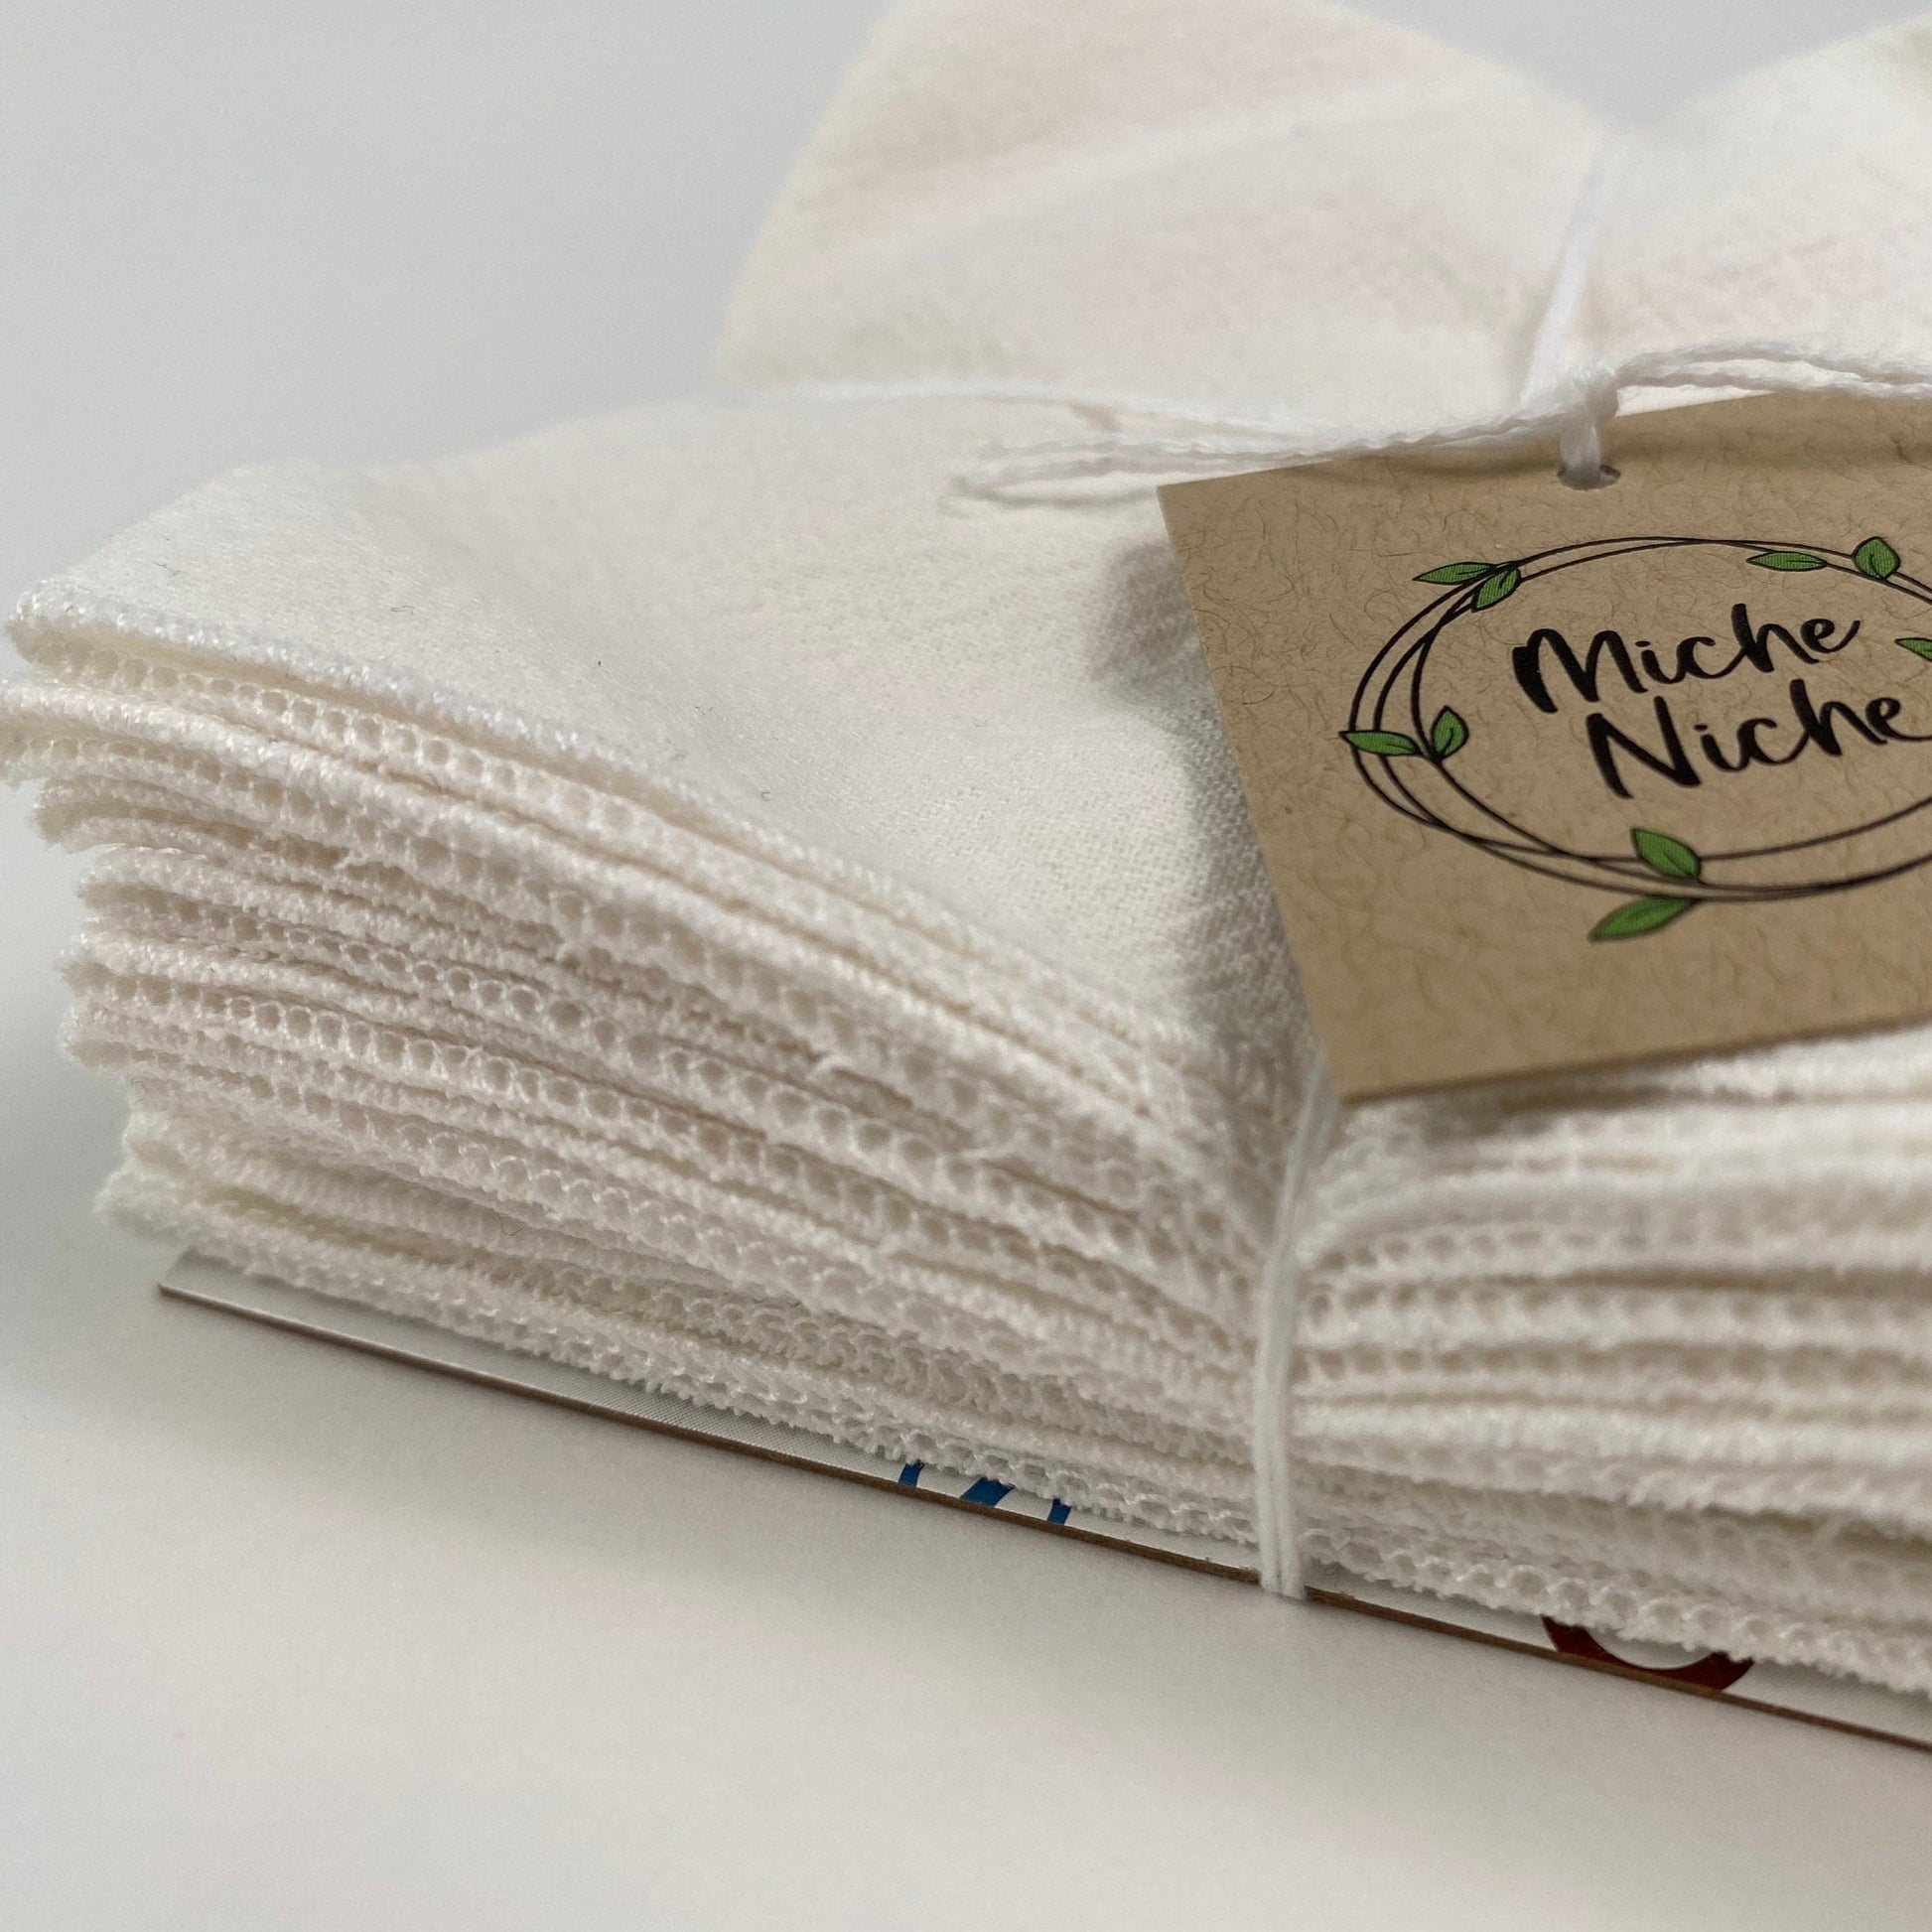 Closer view of the surged edge of Miche Niche every day reusable napkins with a white napkin and white edge stitching.